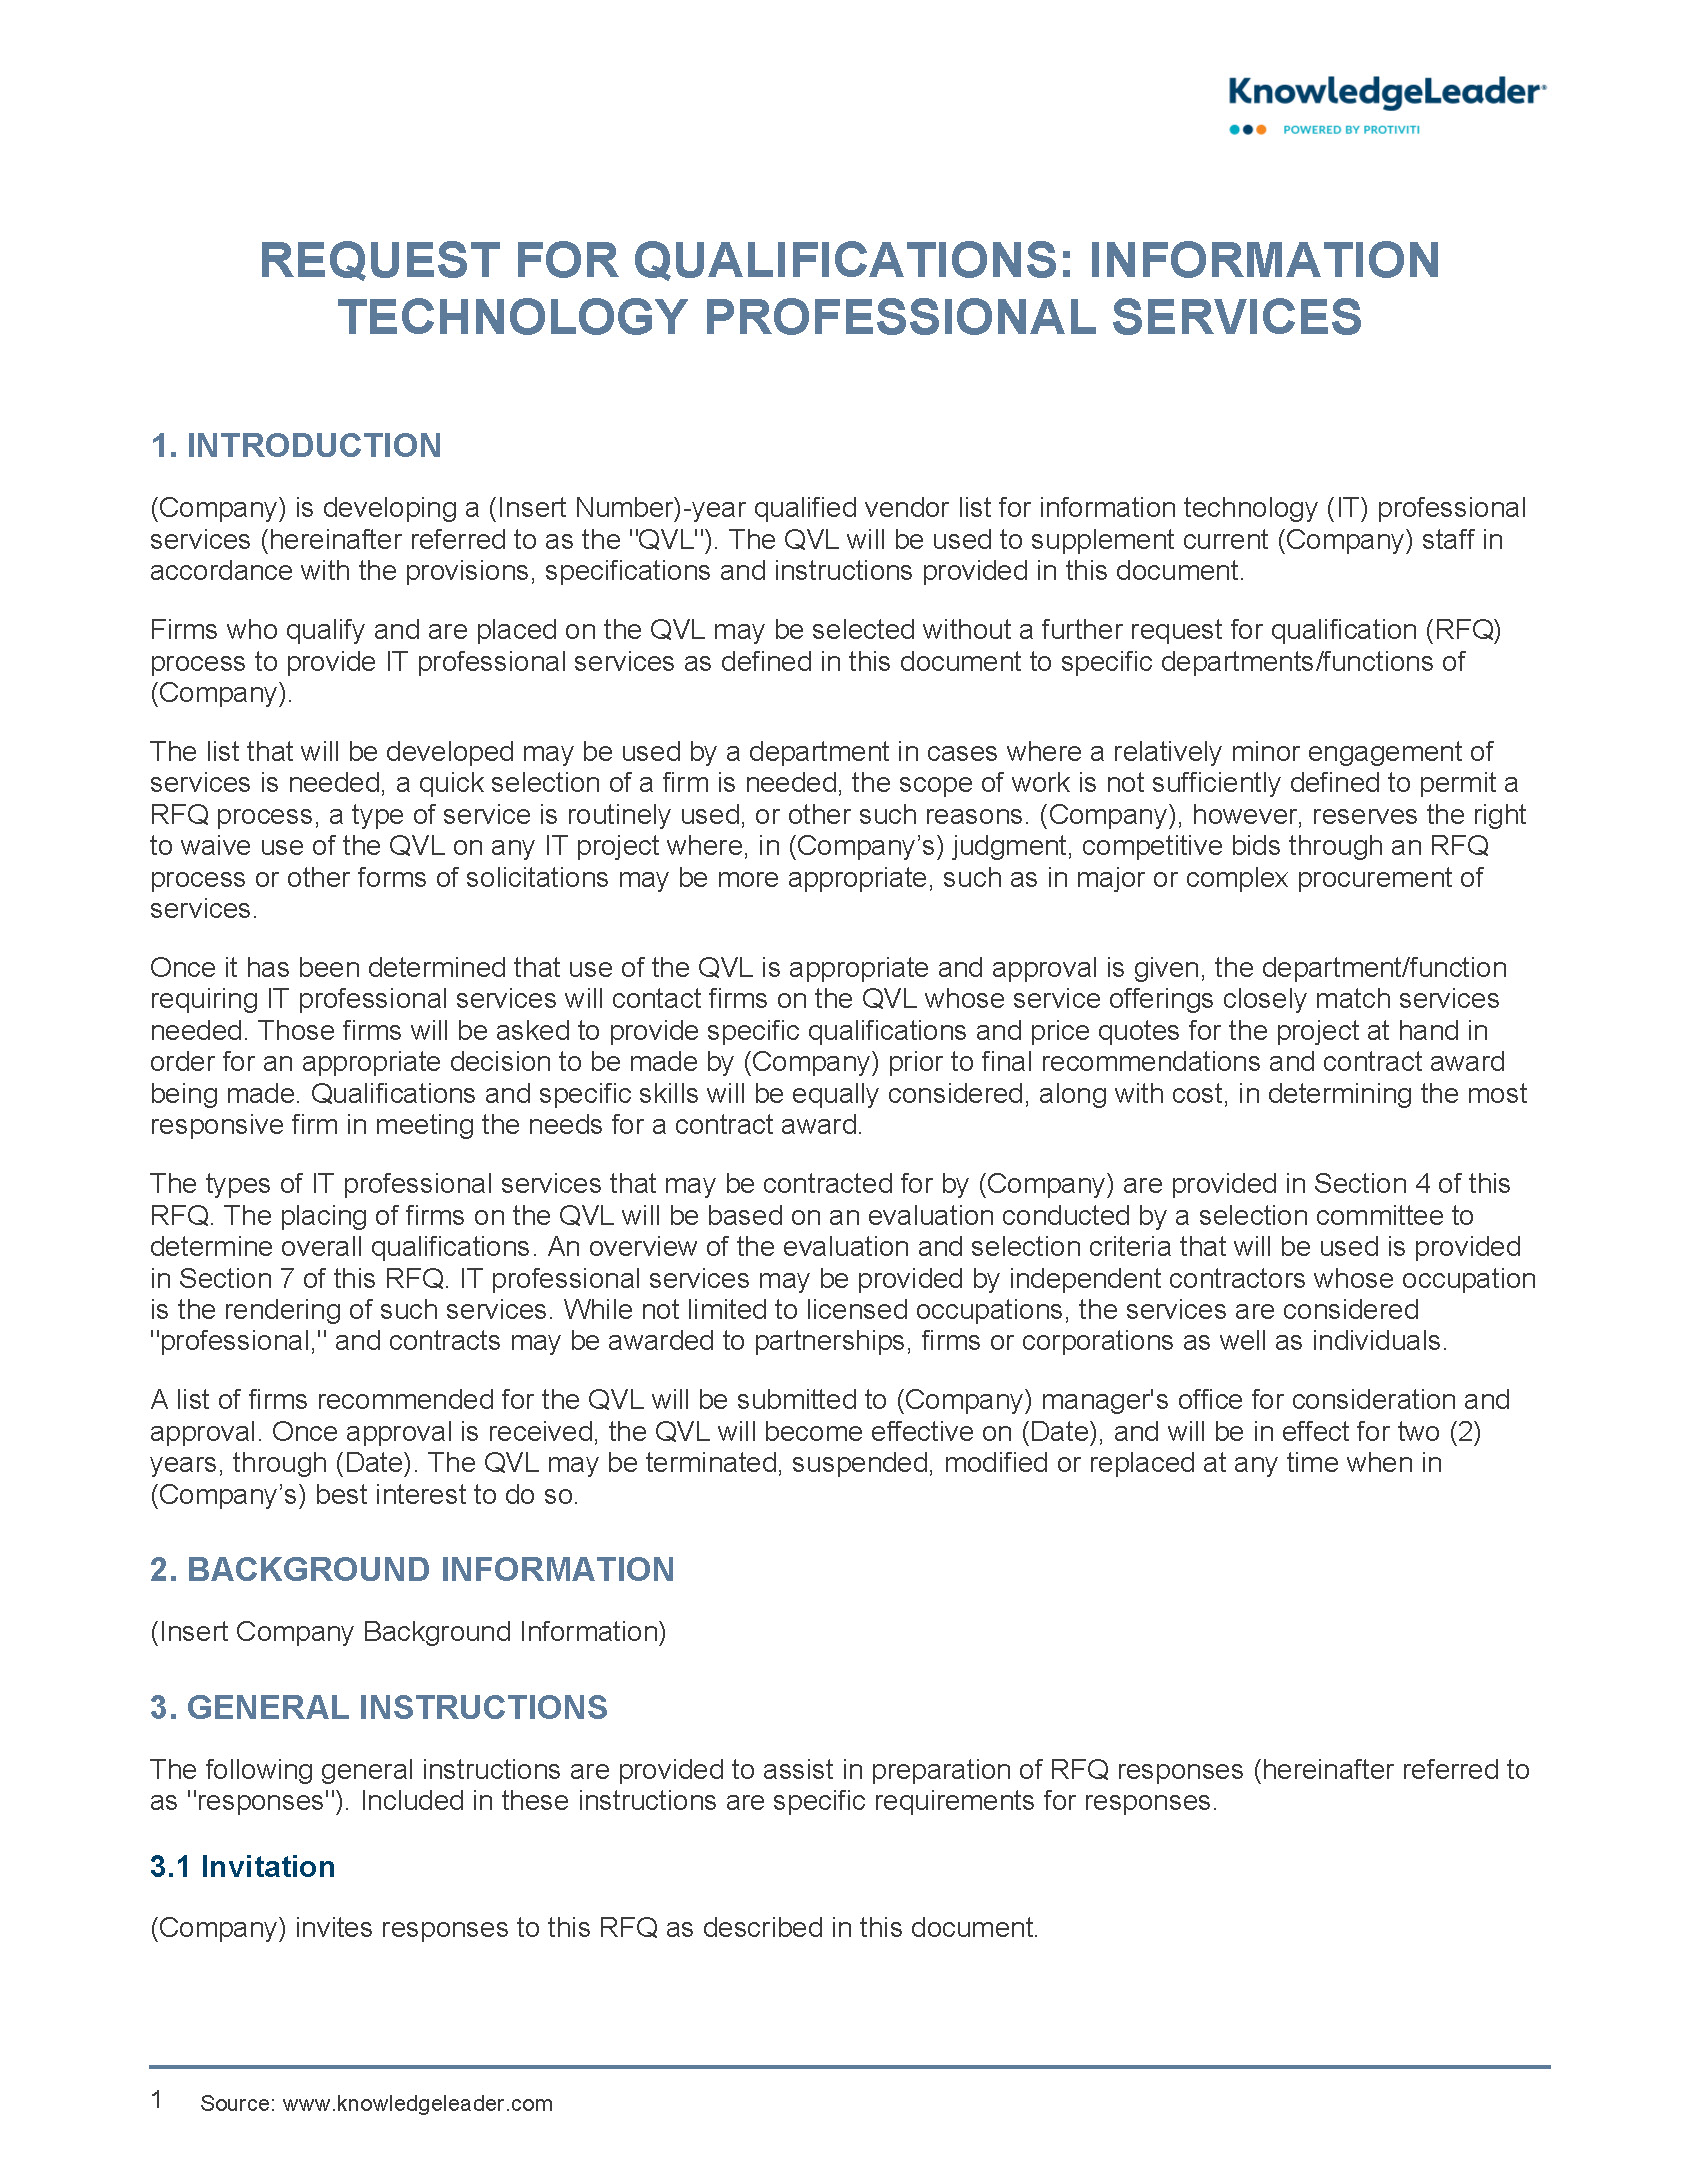 Request for Qualifications - Information Technology Professional Services